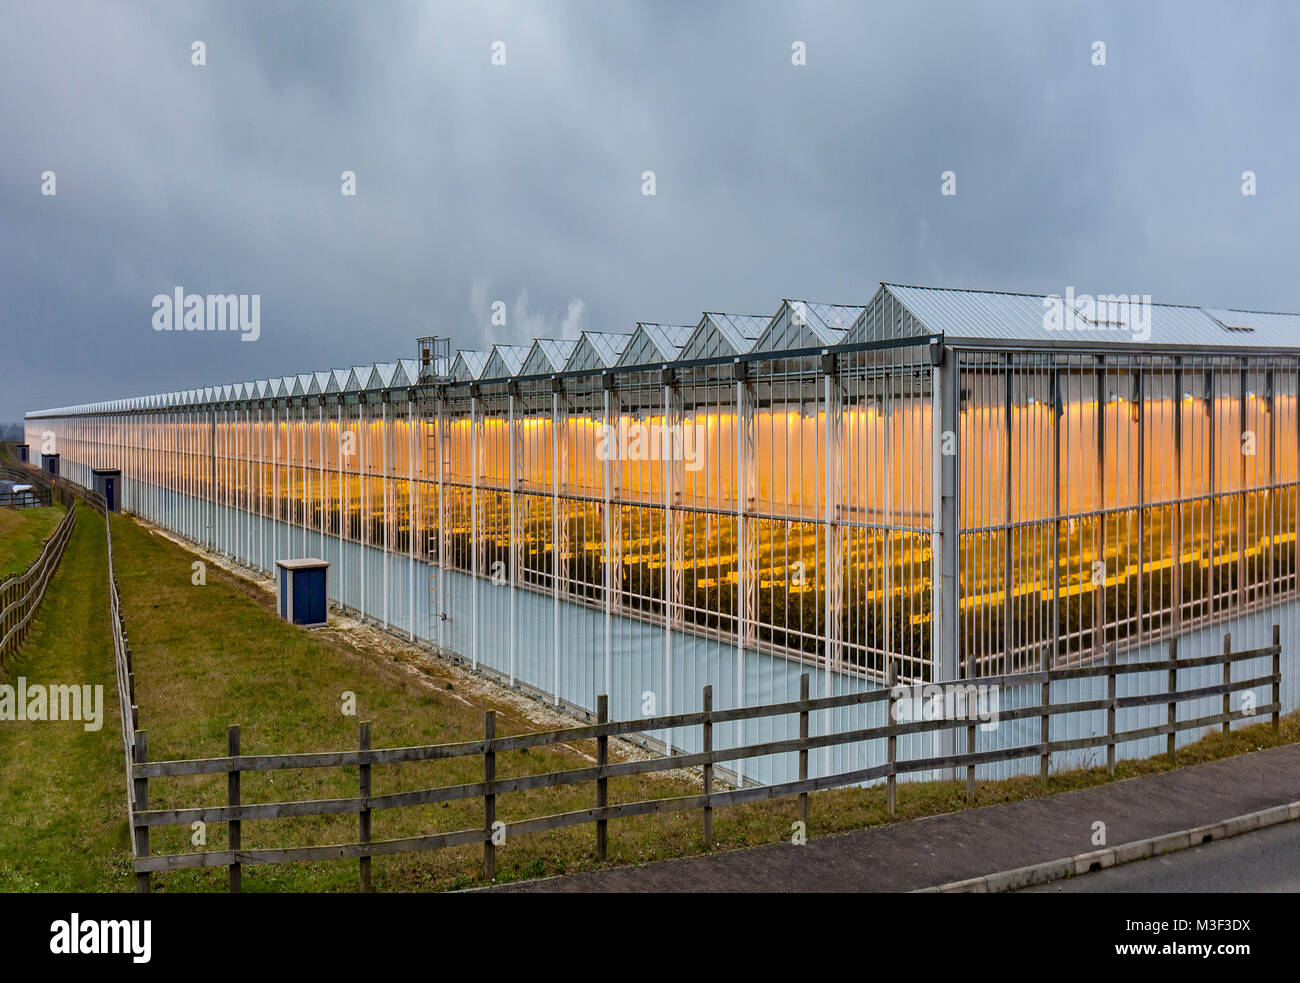 Thanet Earth greenhouses in winter, Kent, UK. Stock Photo